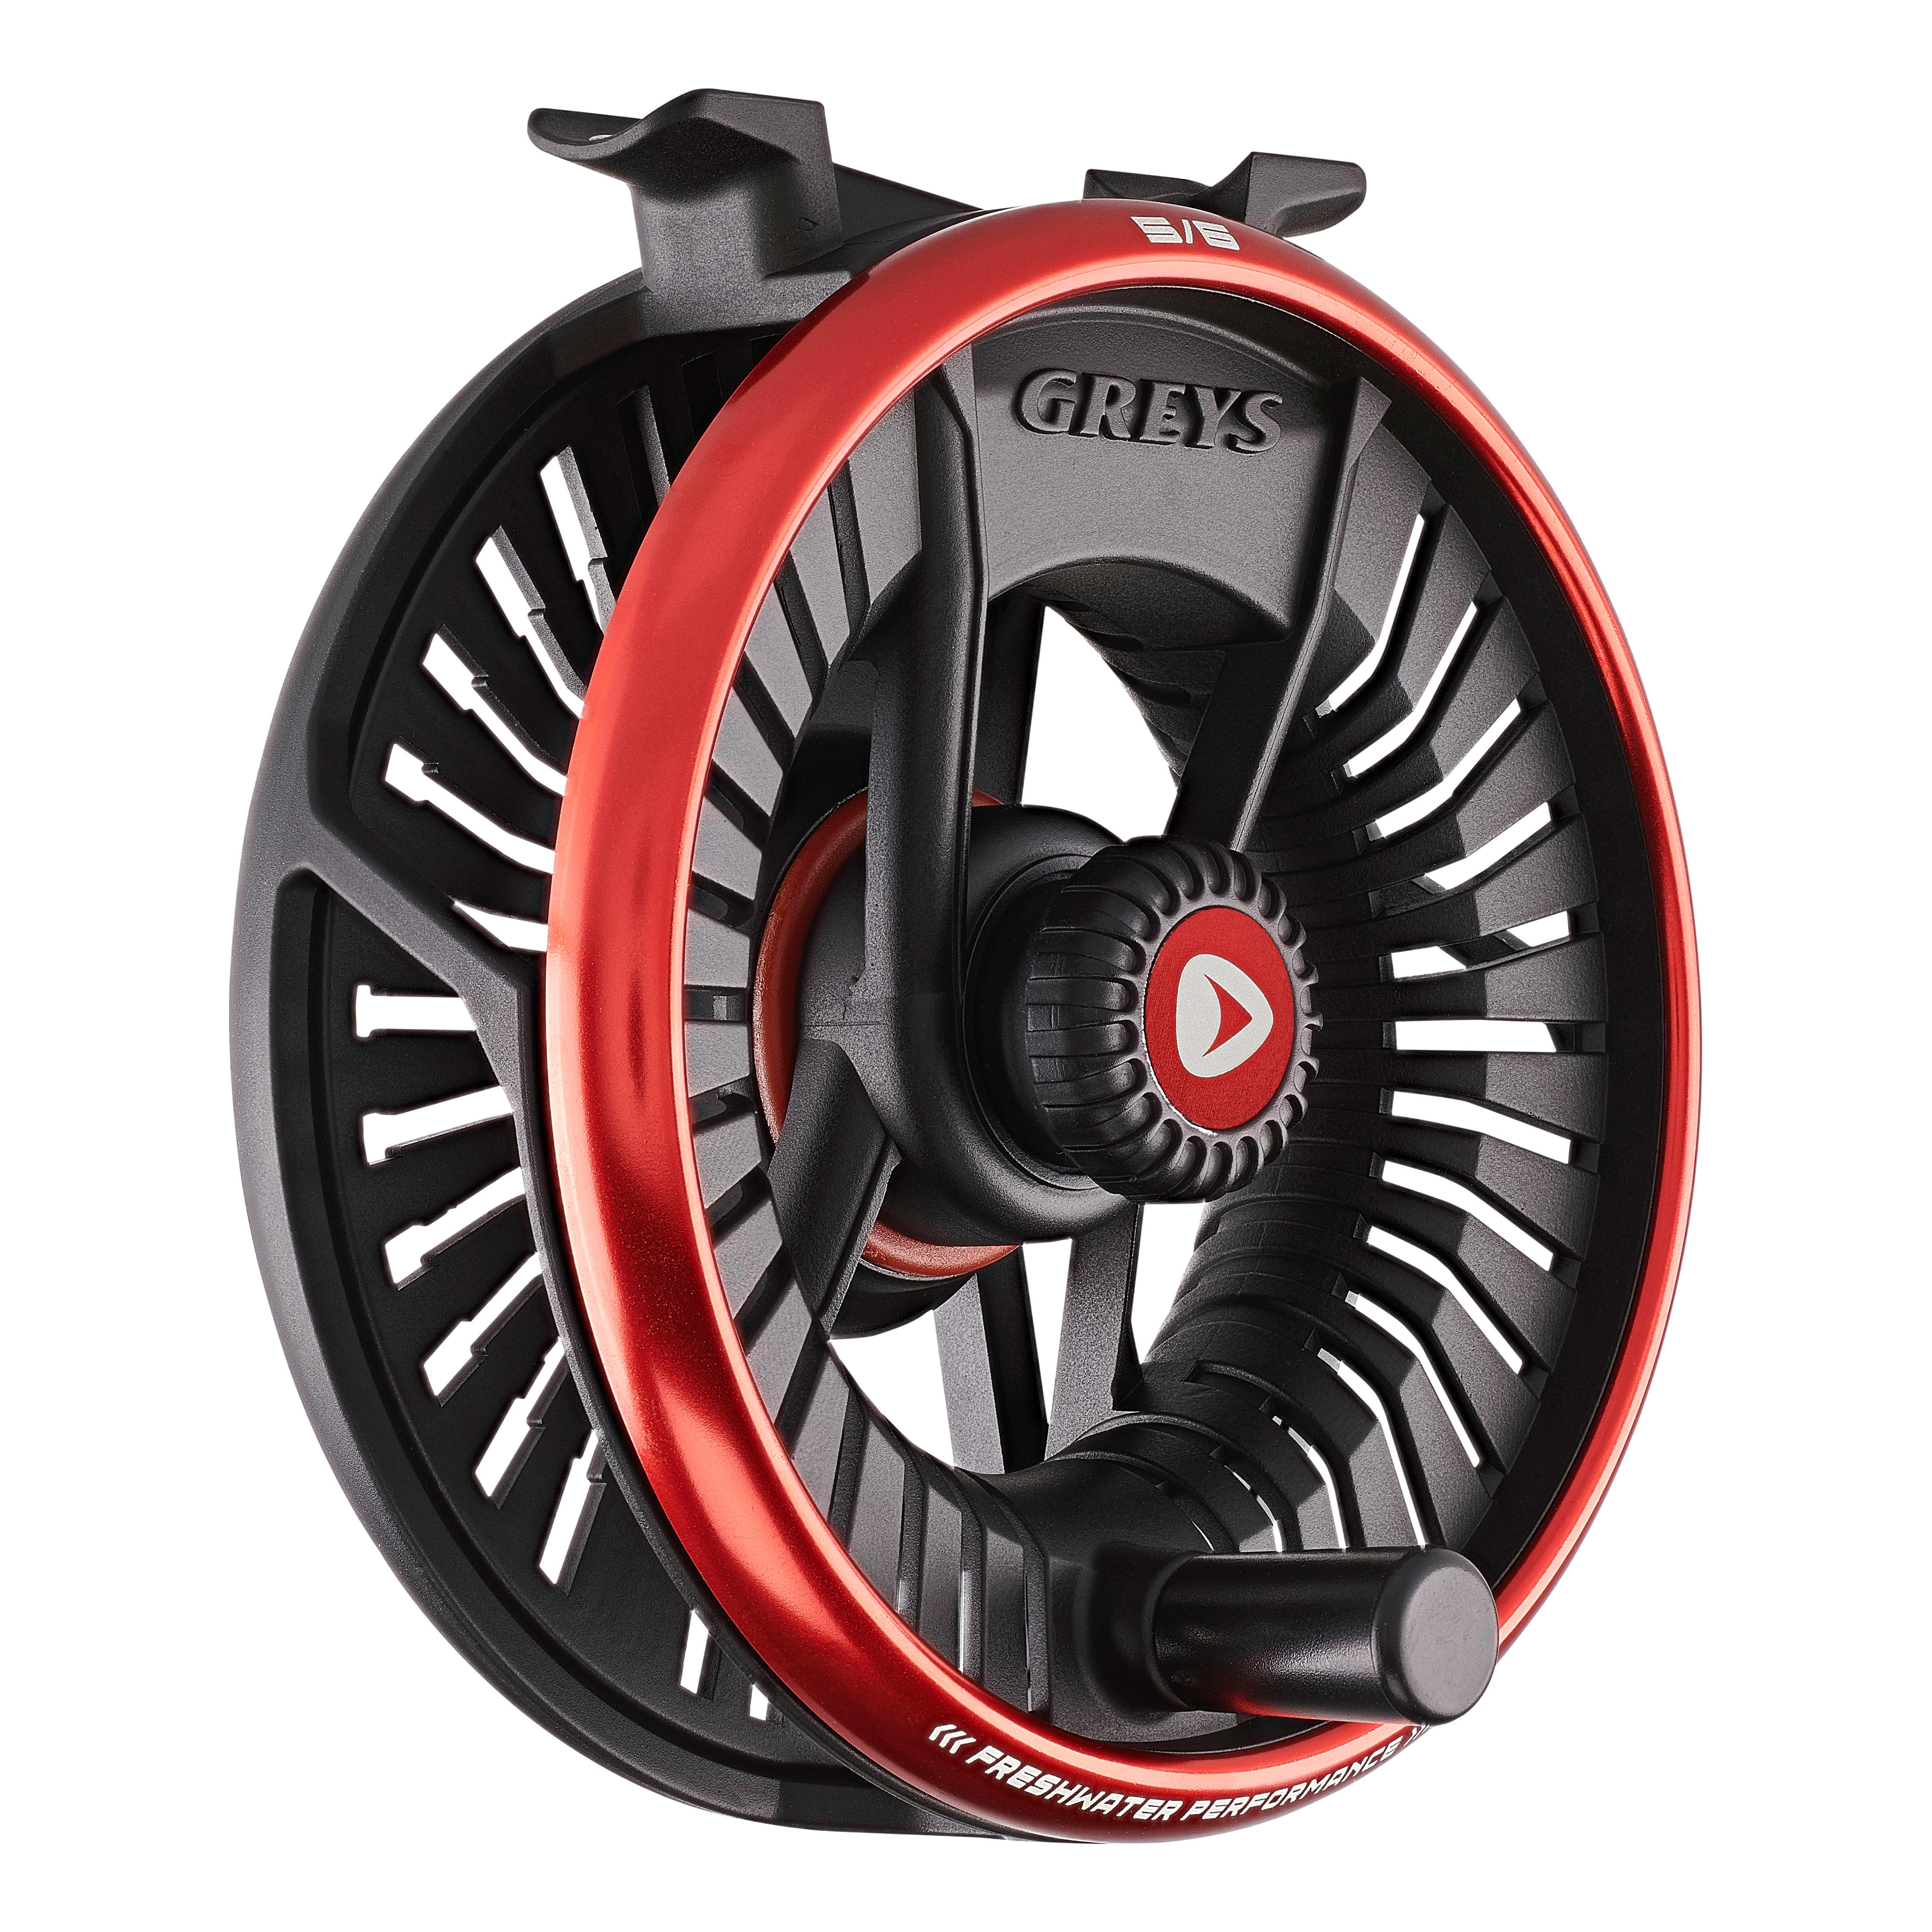 Greys® Tail Fly Reel